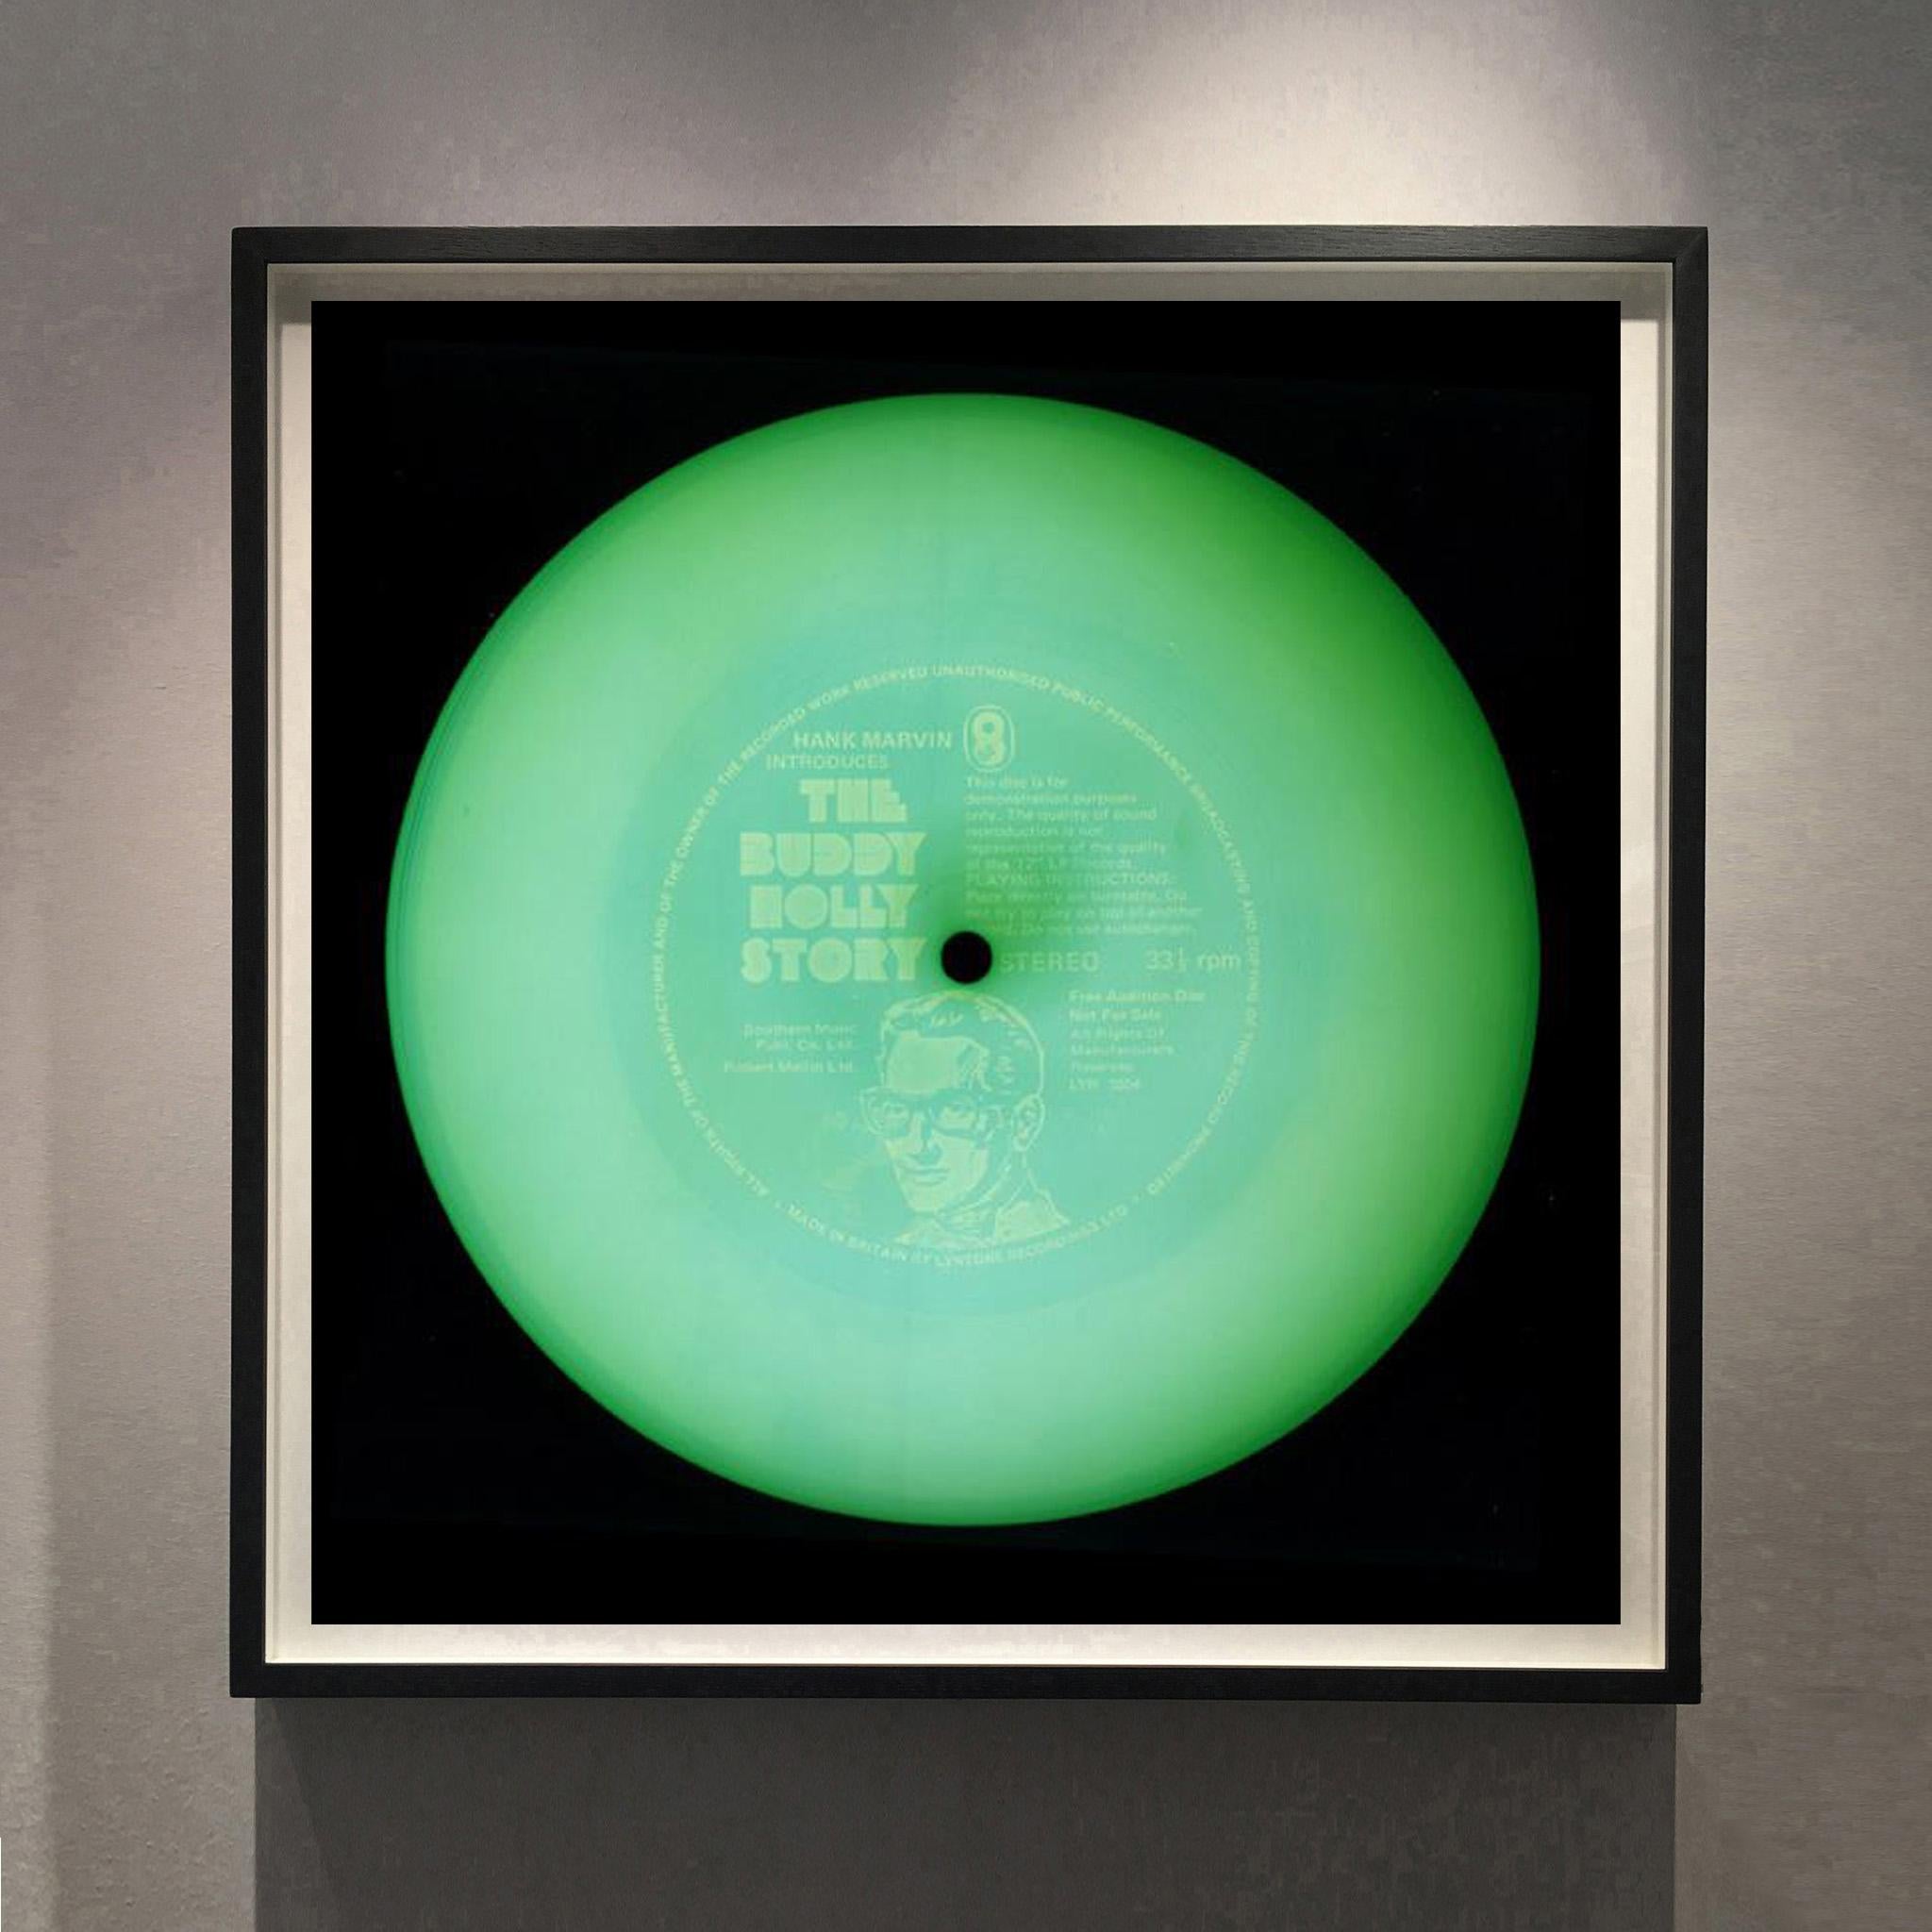 Vinyl Collection, Audition Disc - Conceptual Pop Art Color Photography - Print by Heidler & Heeps